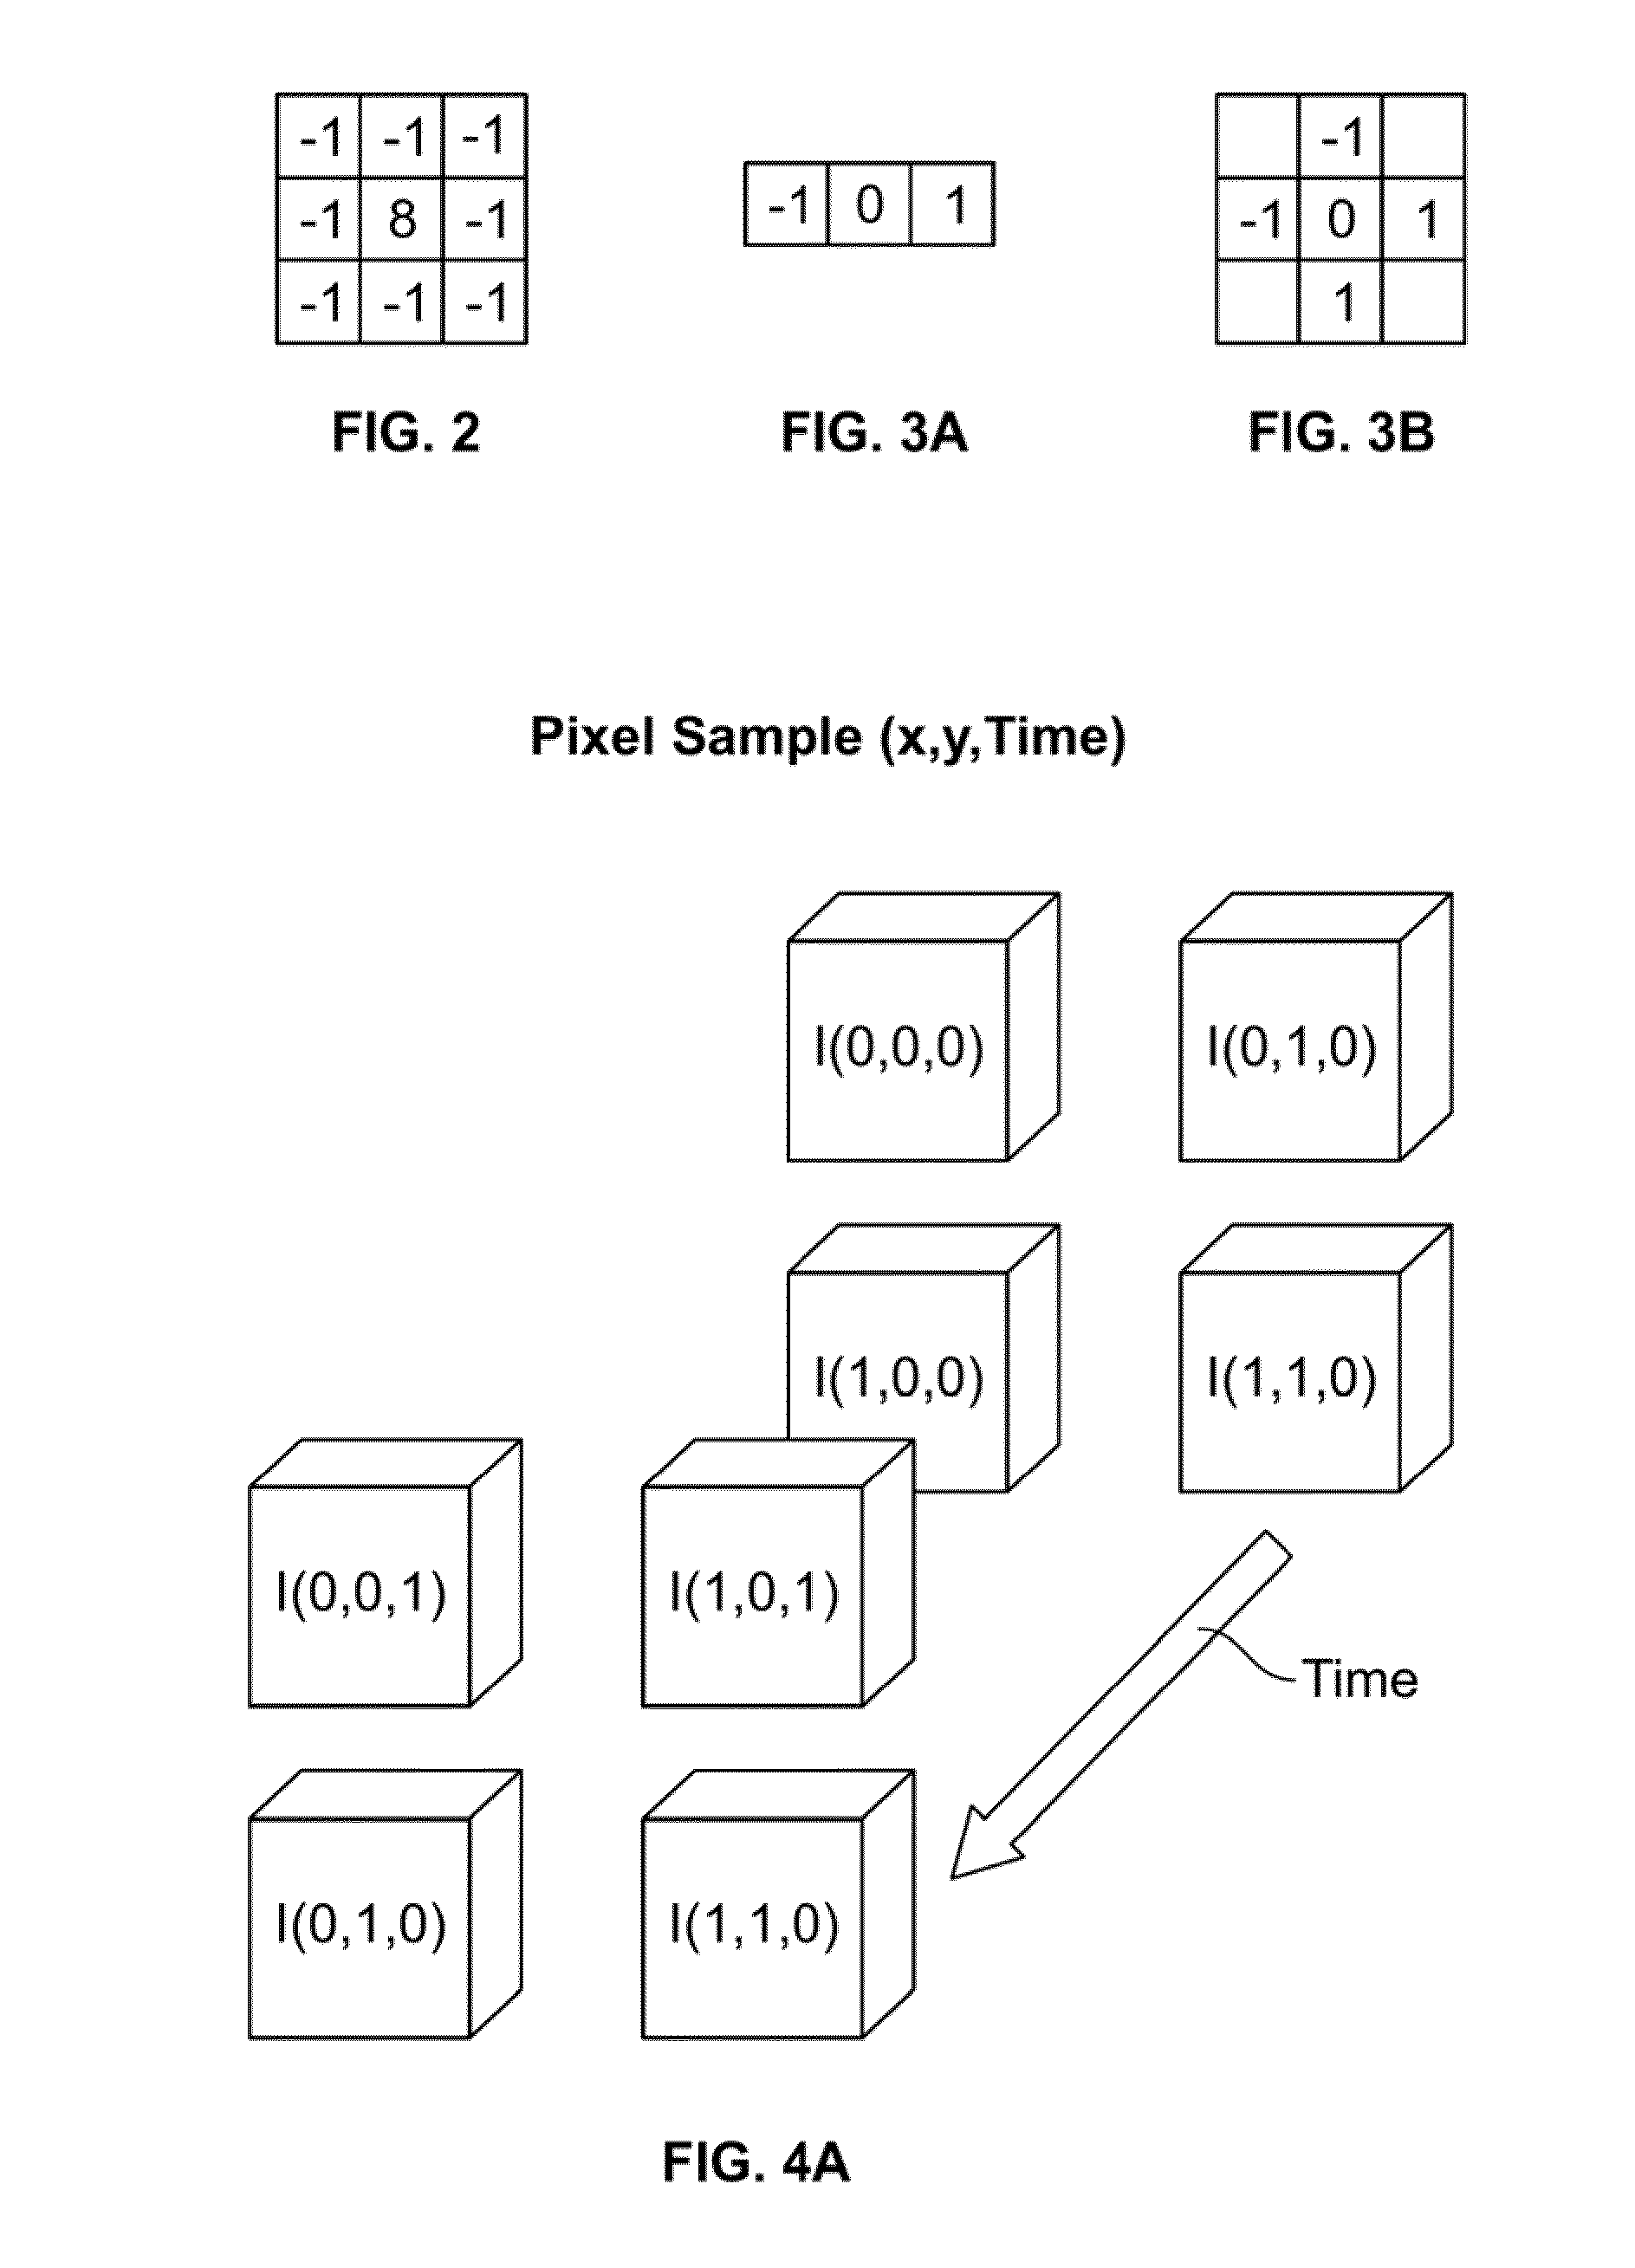 Digital processing method and system for determination of optical flow